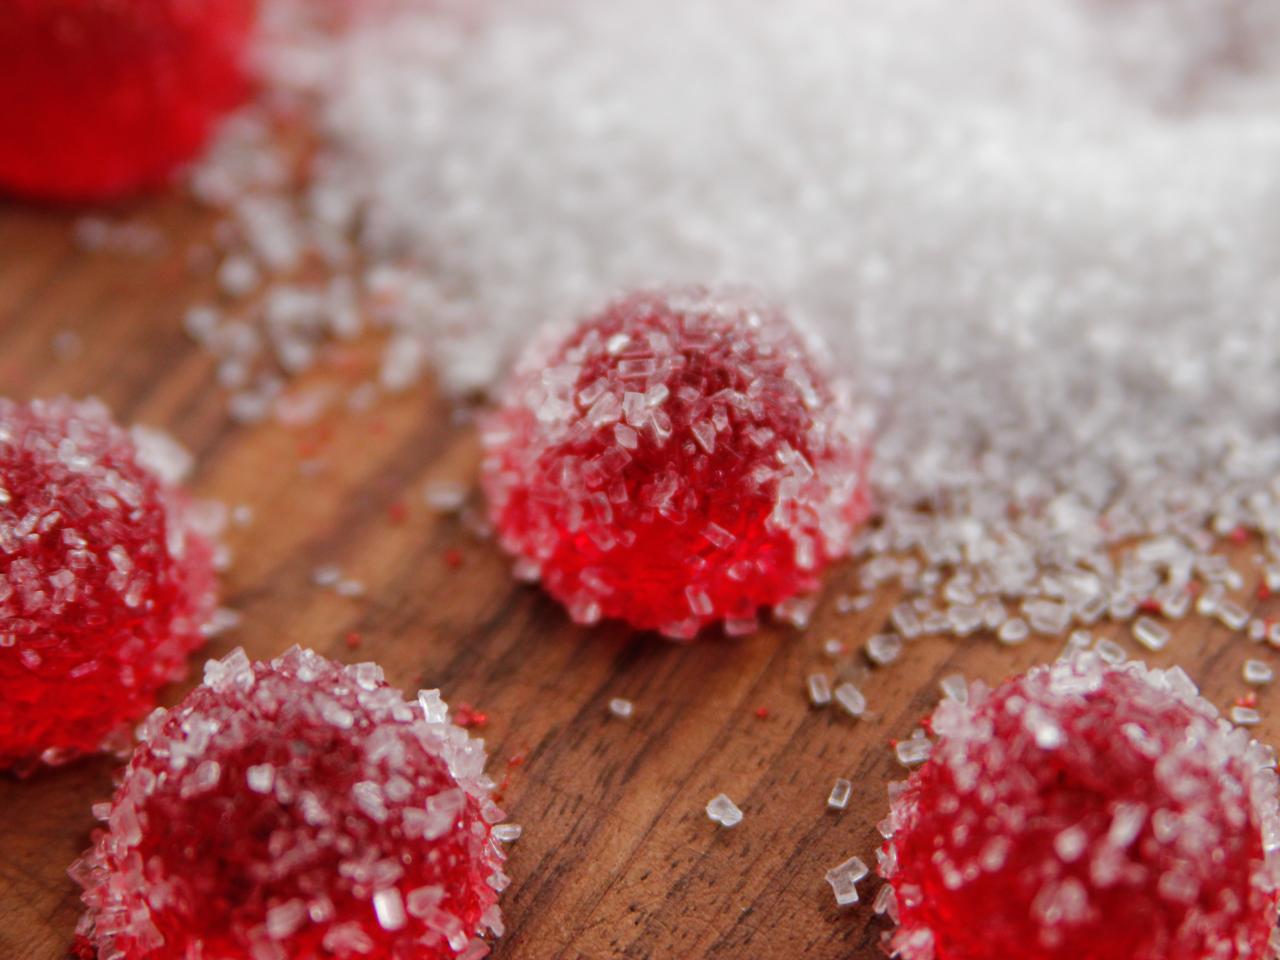 10 Easy Homemade Candies That Make Great Last-Minute Gifts ...